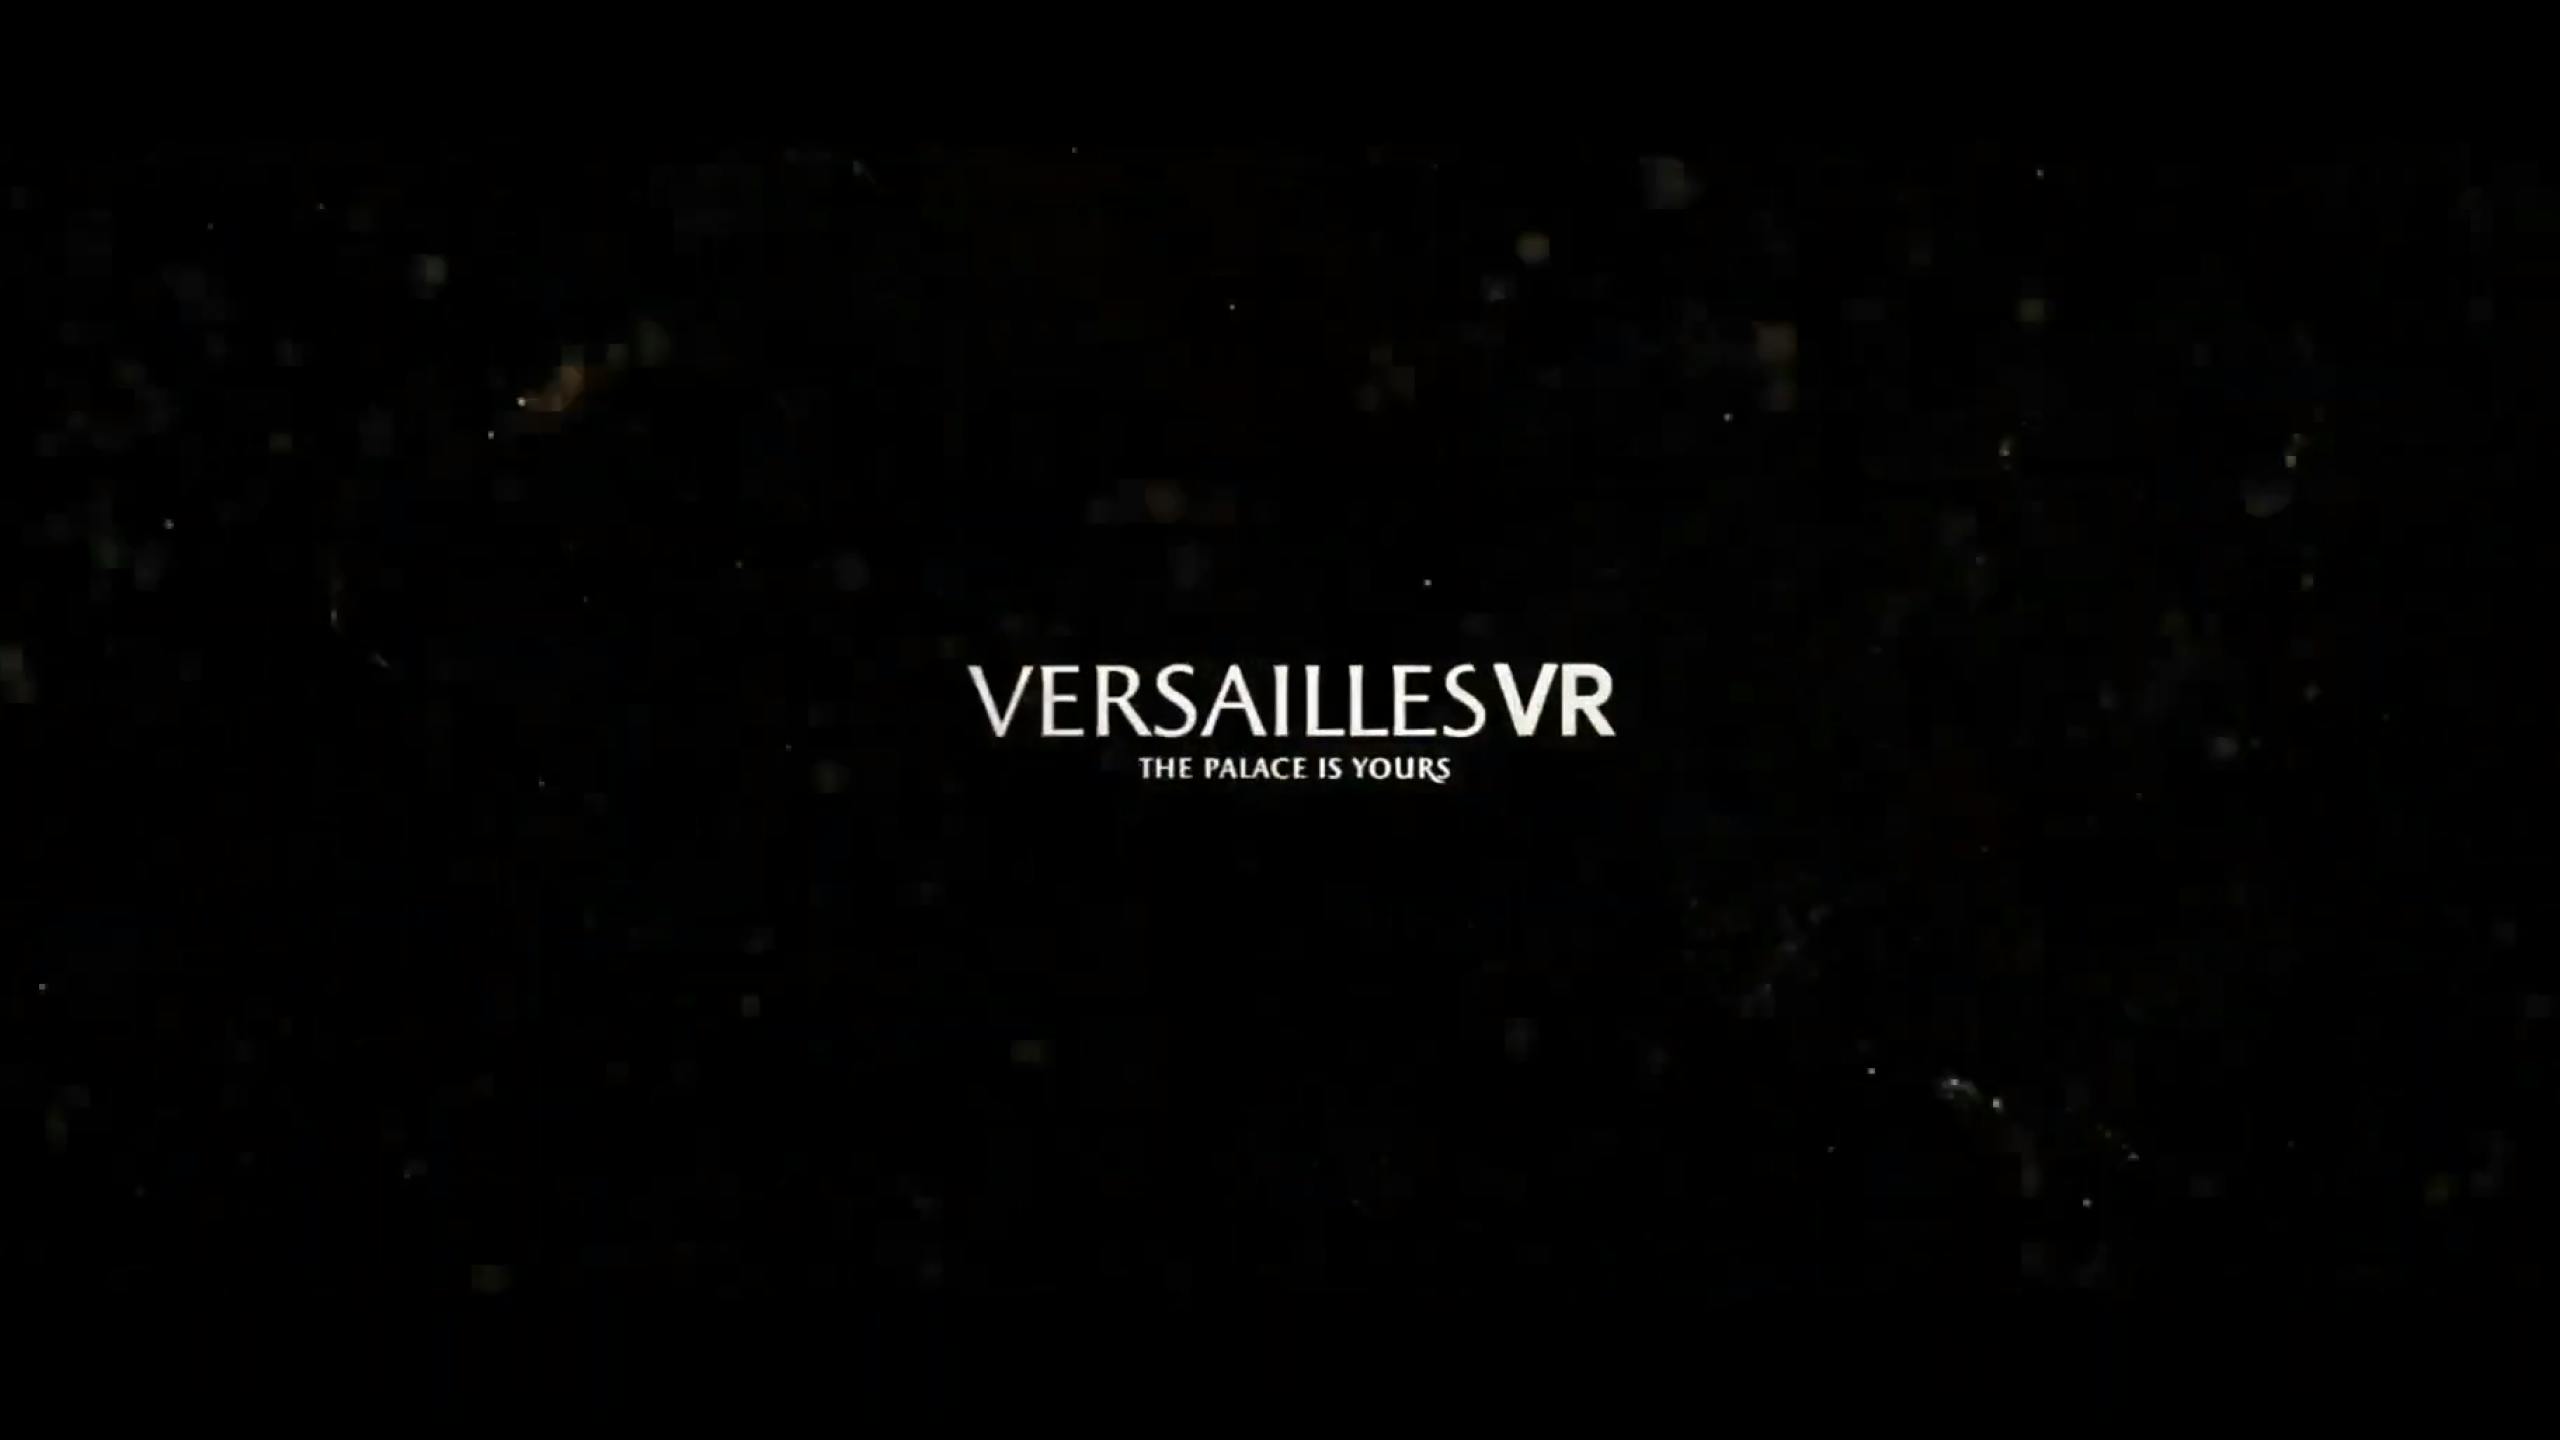 Is written on a black screen "Versailles VR - The palace is yours"